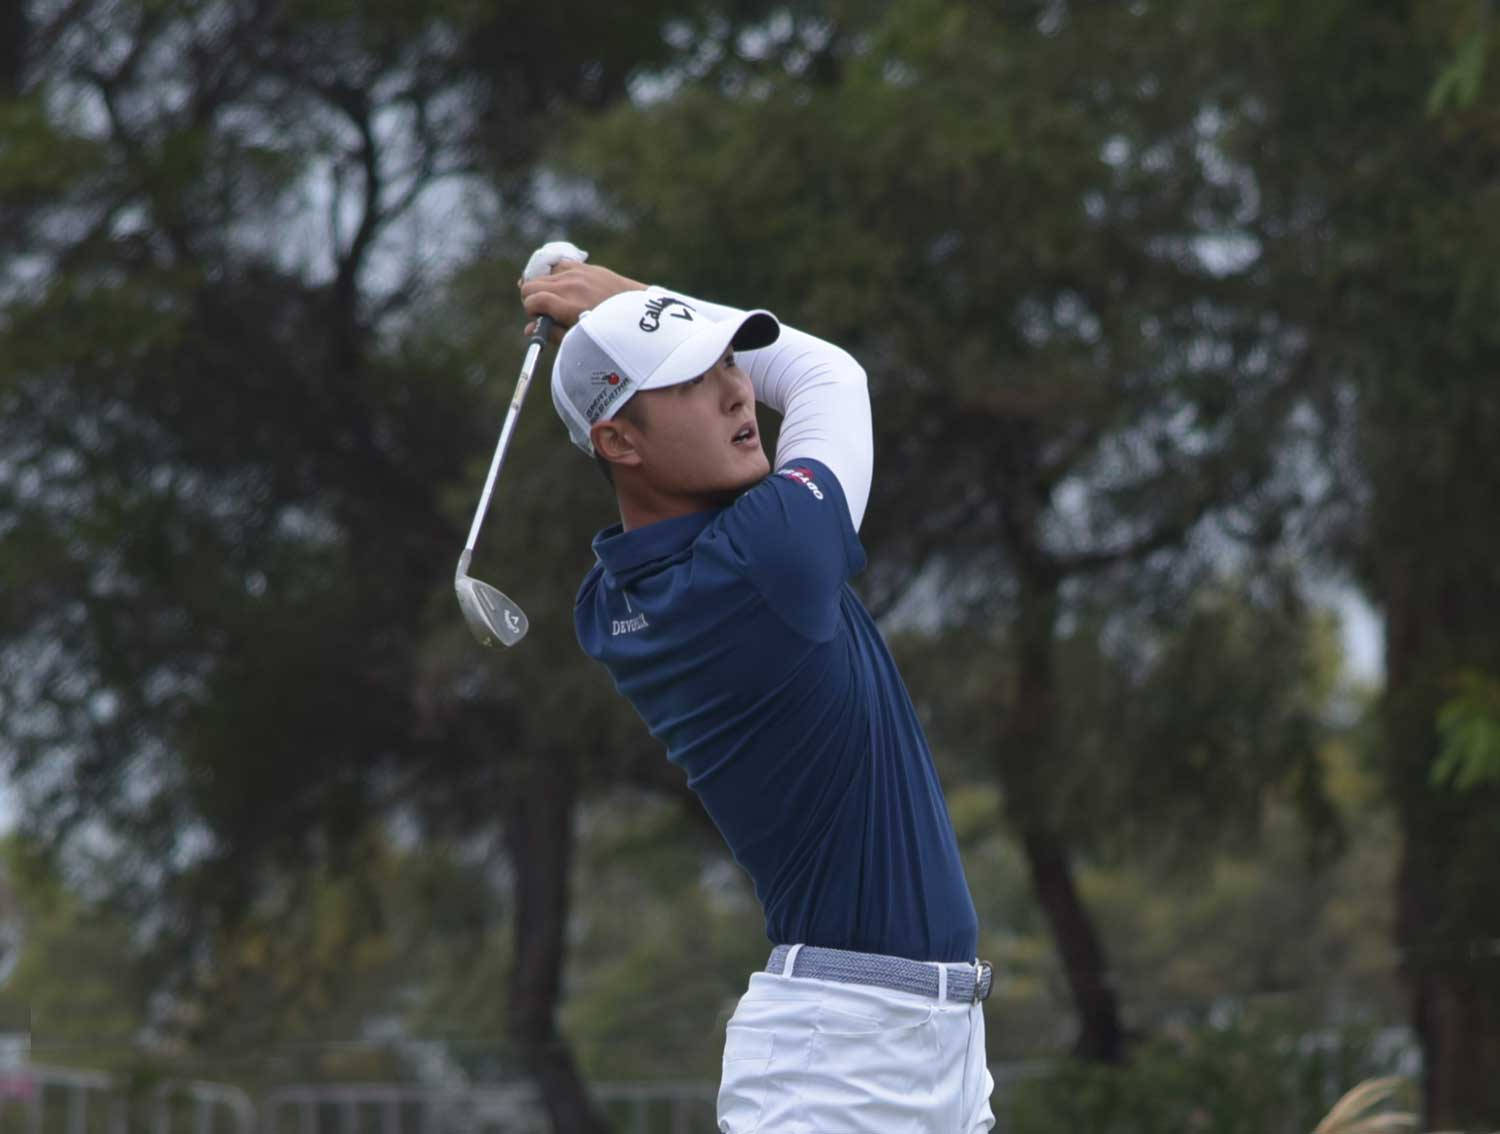 Danny Lee demonstrating intensity during a golf match. Wallpaper